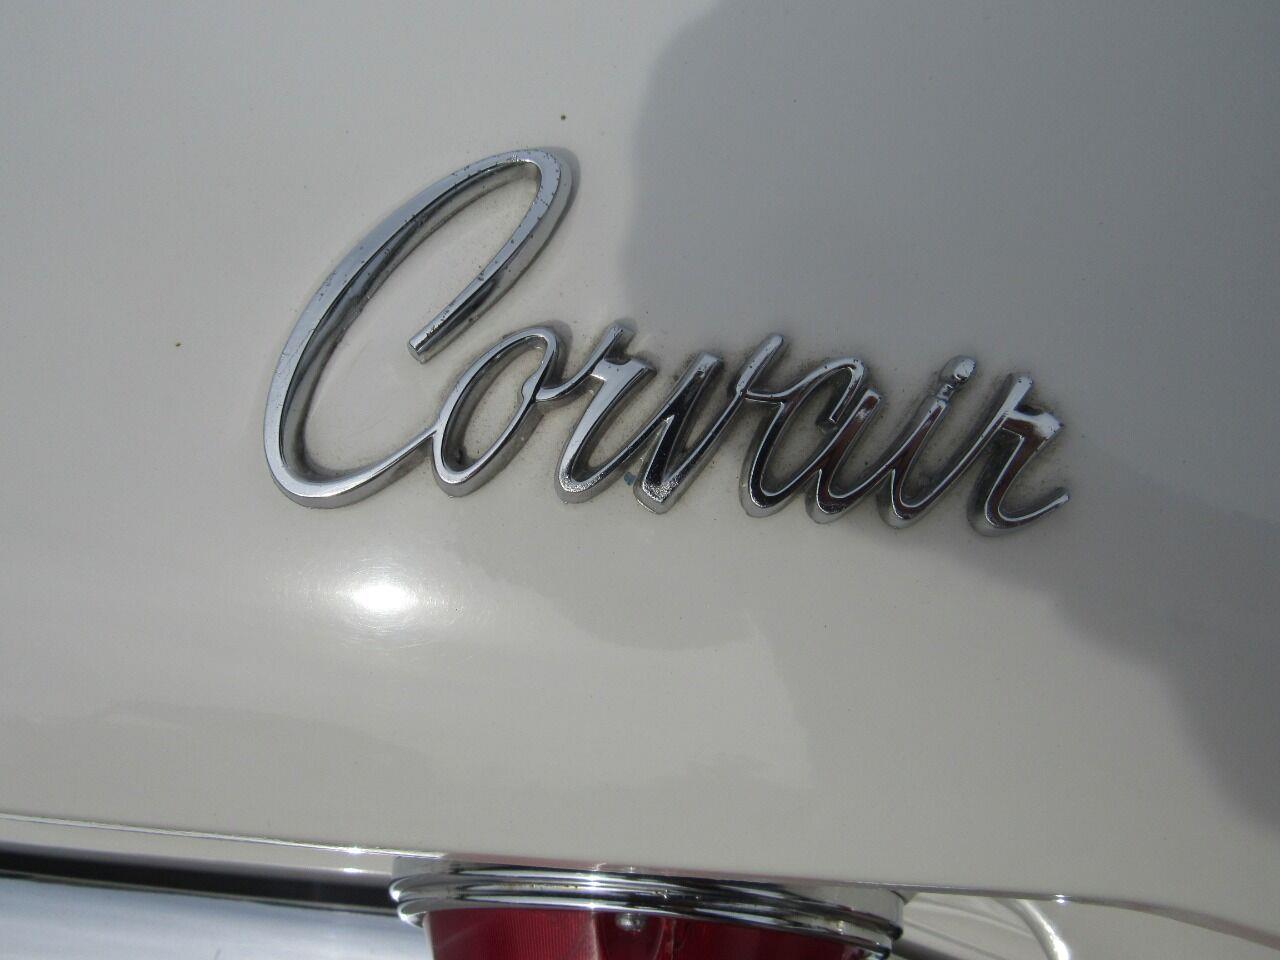 1966 Chevrolet Corvair for sale in Ashland, OH – photo 12